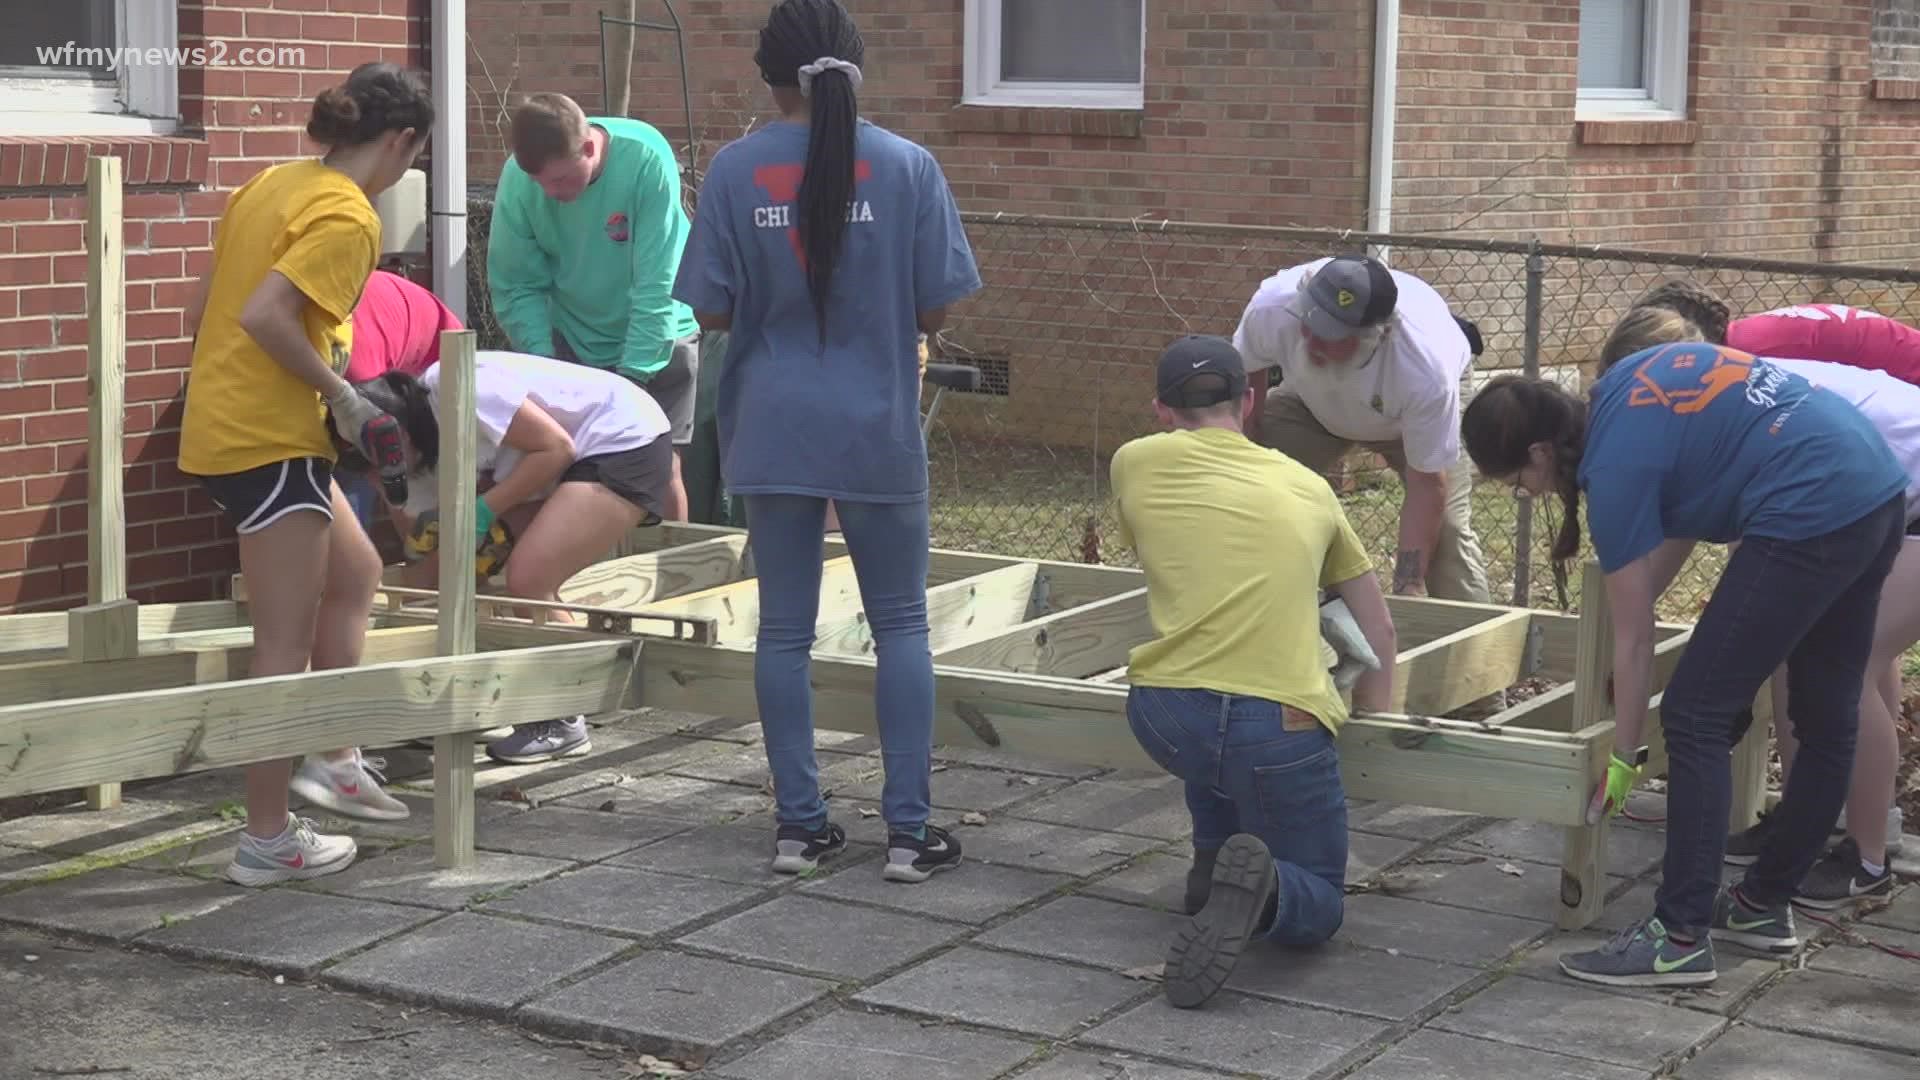 UVA students are sacrificing their spring break for community service.